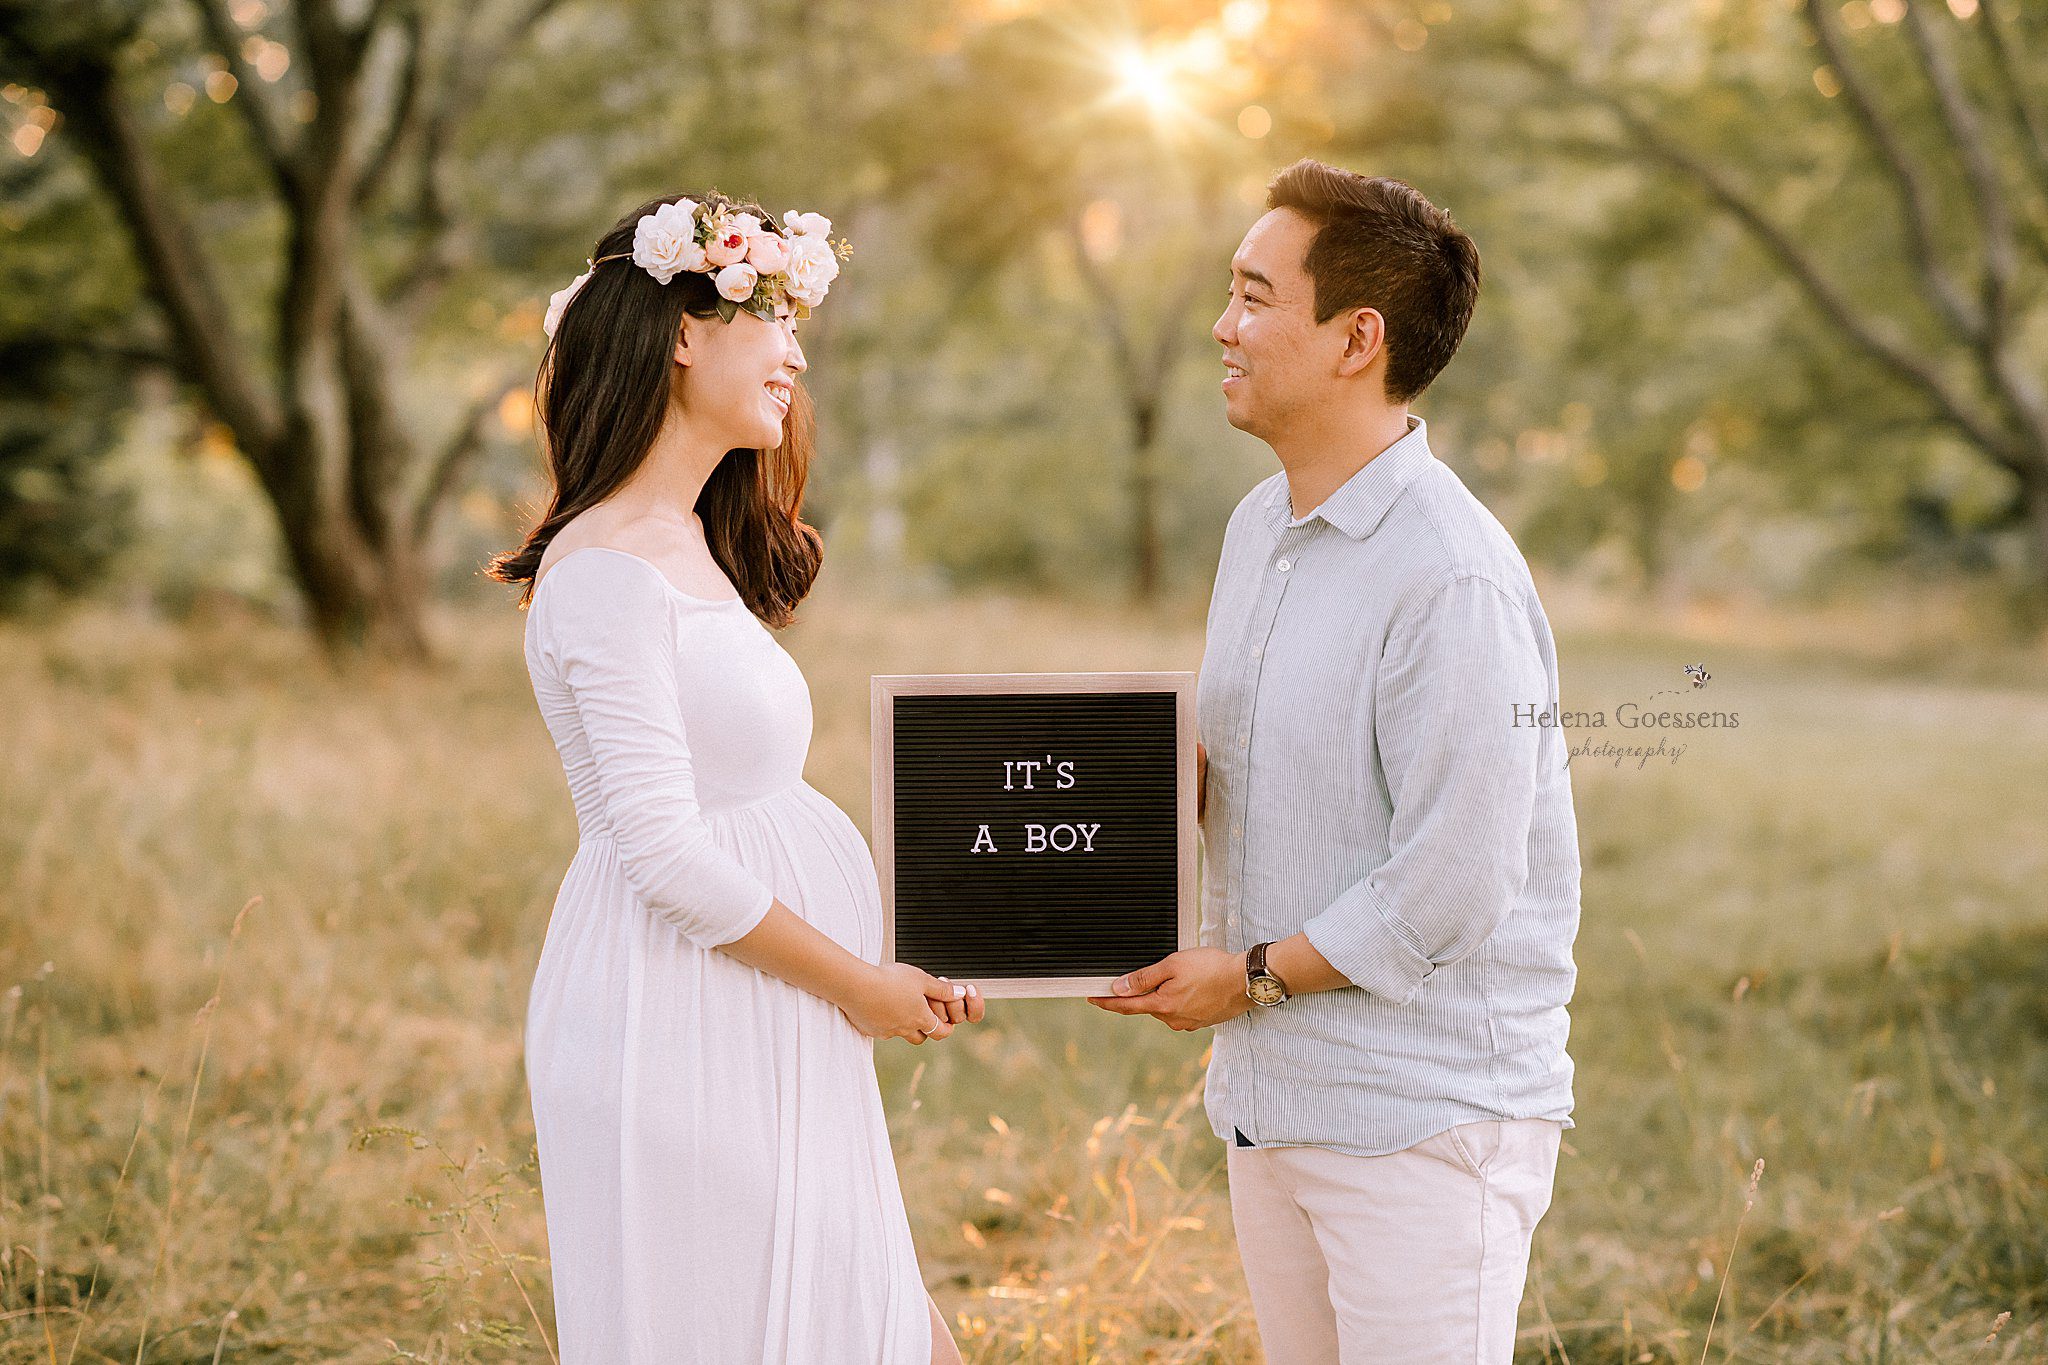 mom in white gown with floral crown holds sign saying "it's a boy" during maternity portraits